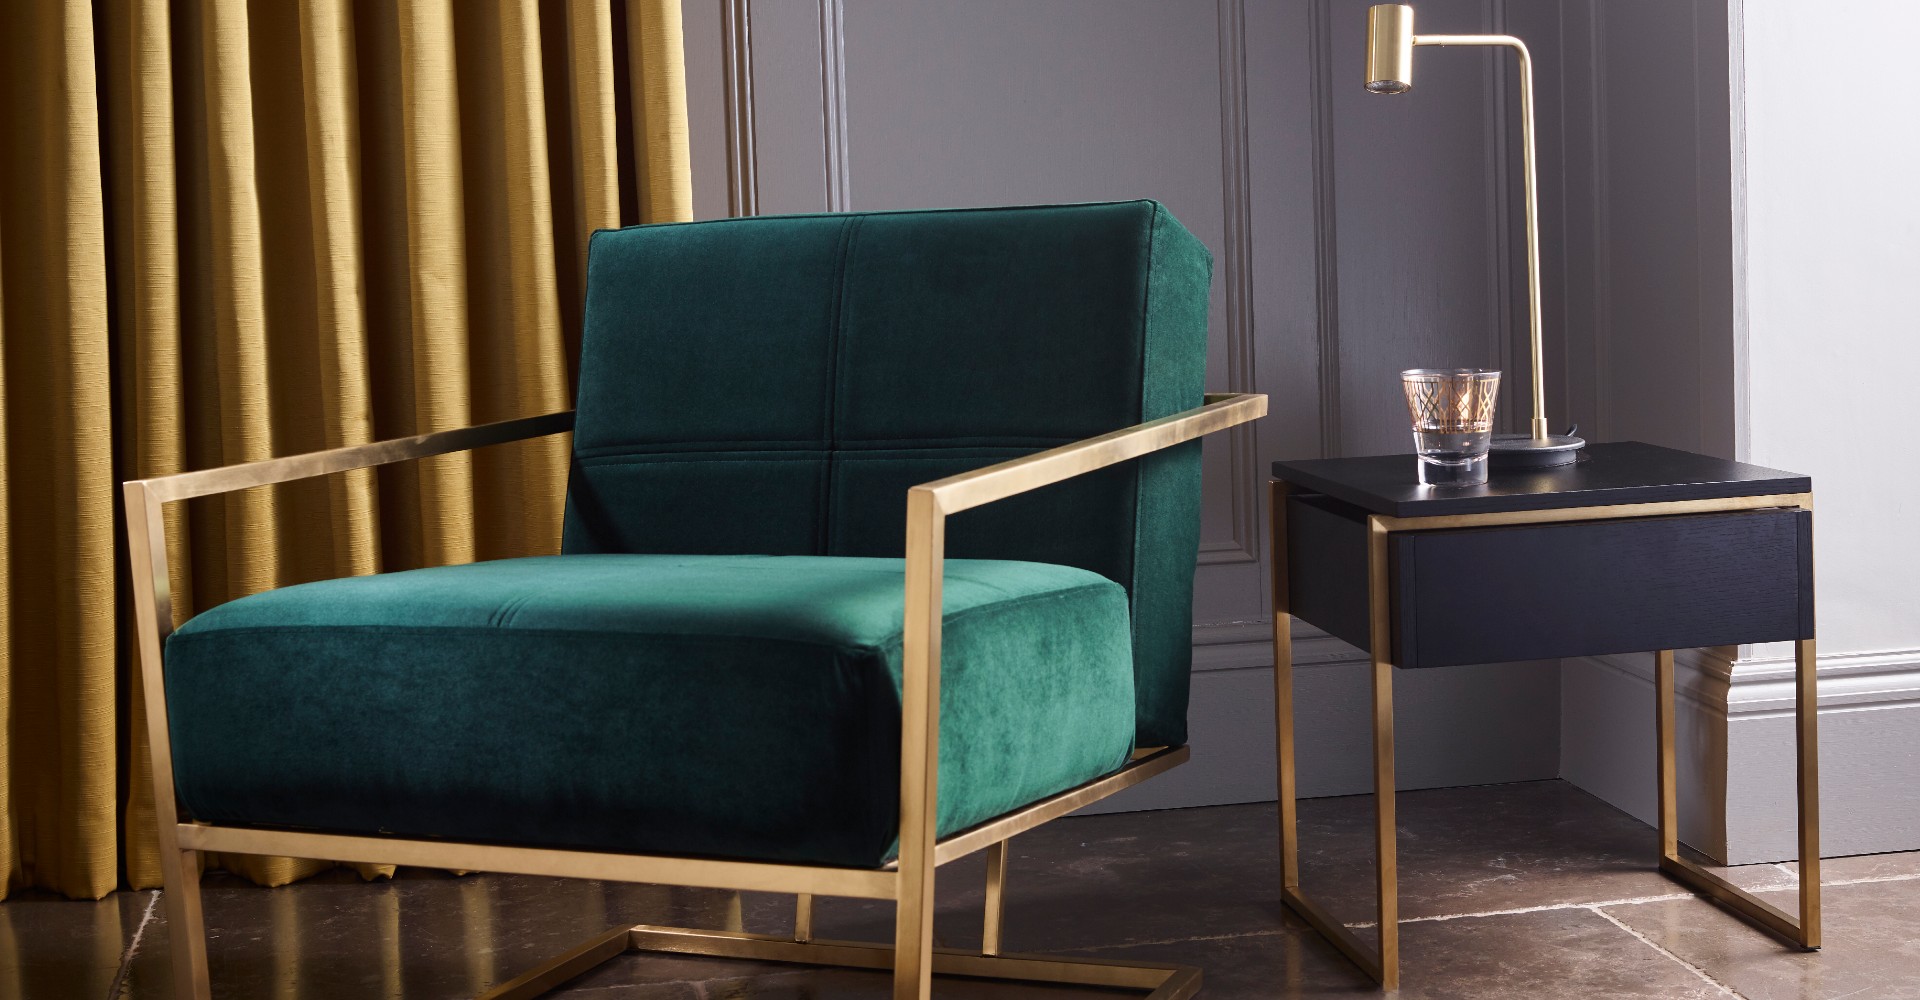 Federico Brushed Brass And Green Upholstery Armchair by Gillmore © GillmoreSPACE Ltd